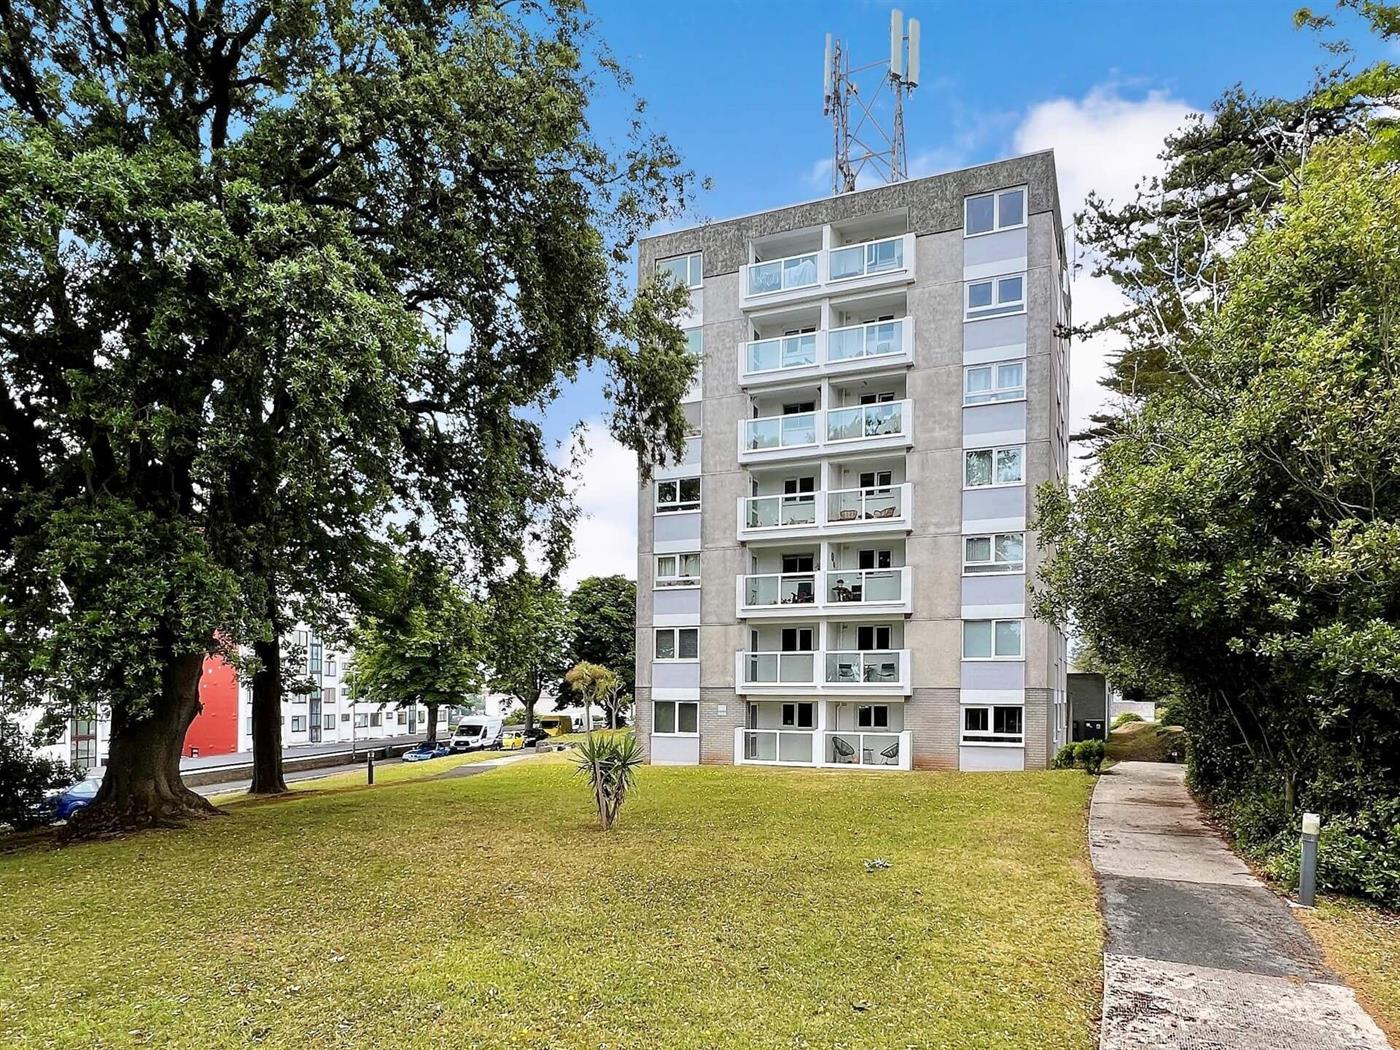 2 Bedroom Apartment to Rent (Let): Waldon Point, St. Lukes Road South, Torquay, TQ2 5YE